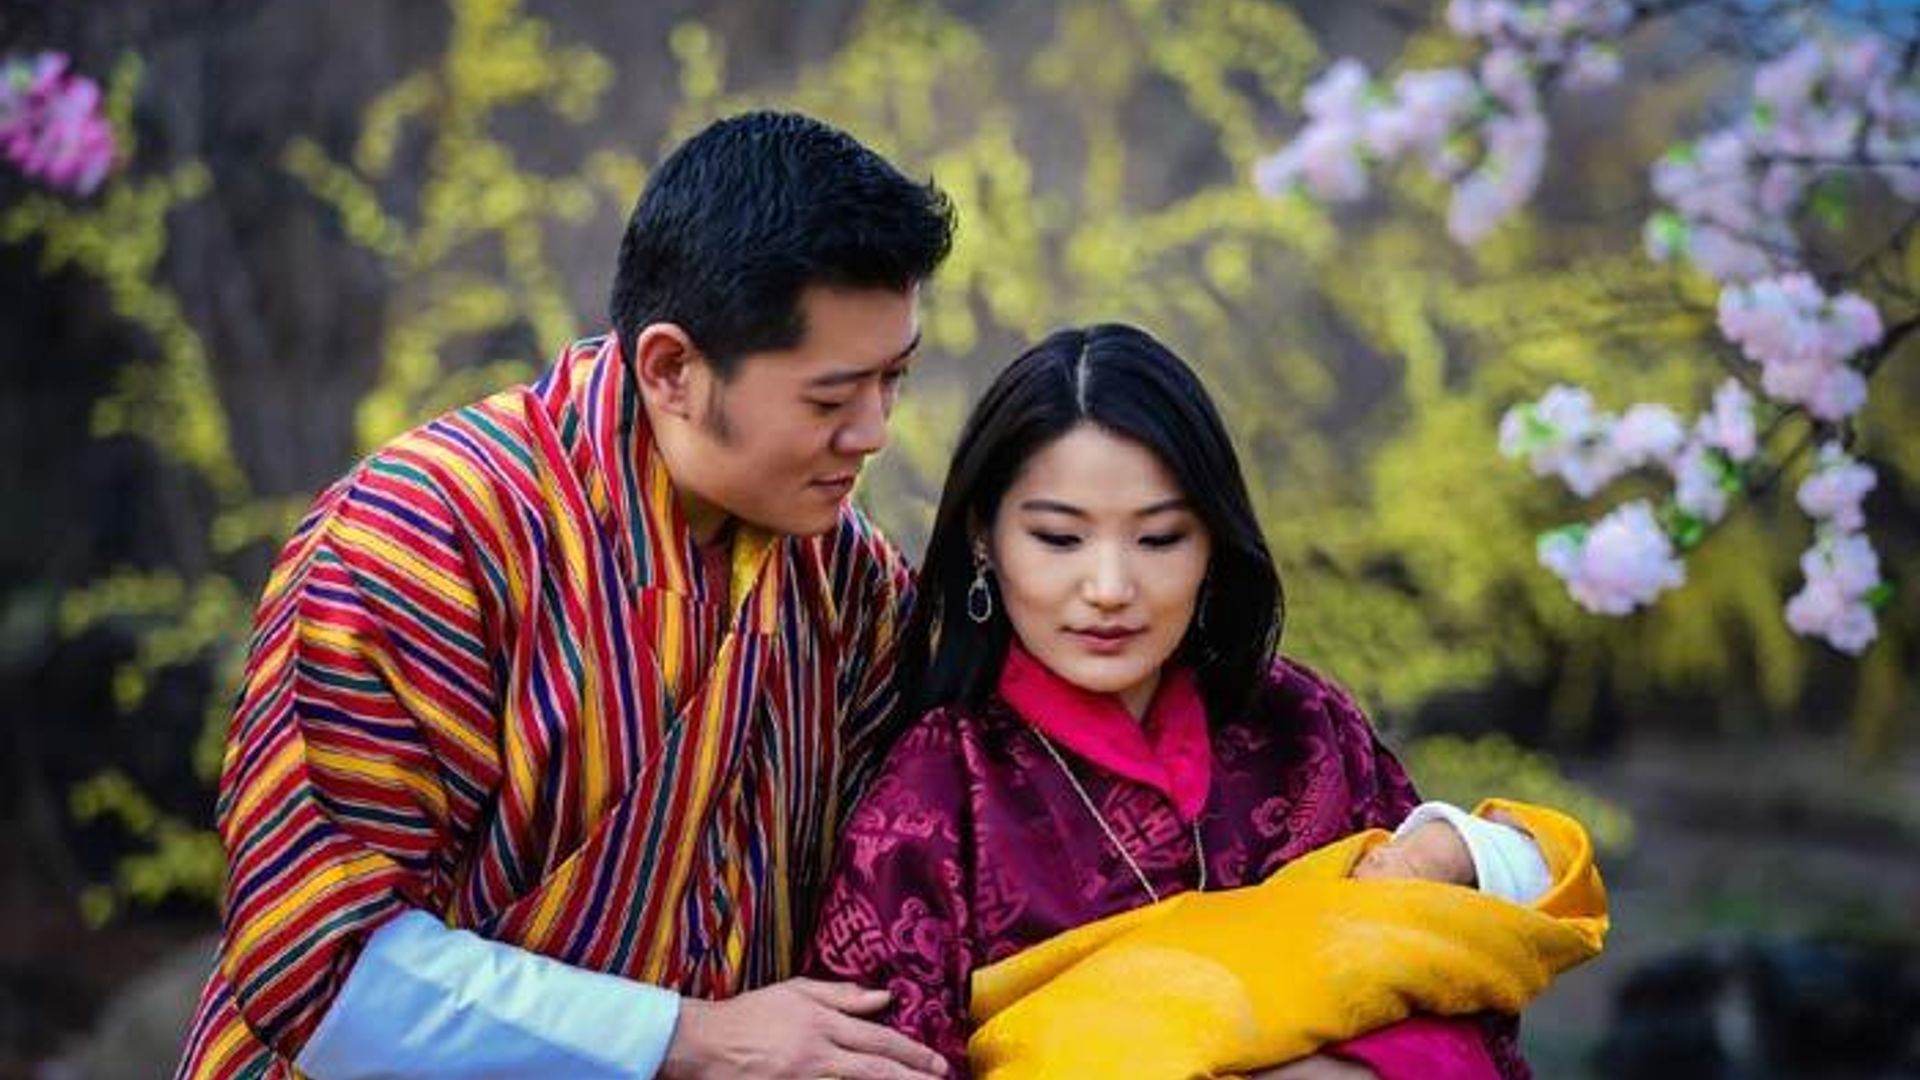 The newborn prince of Bhutan will get his name in April